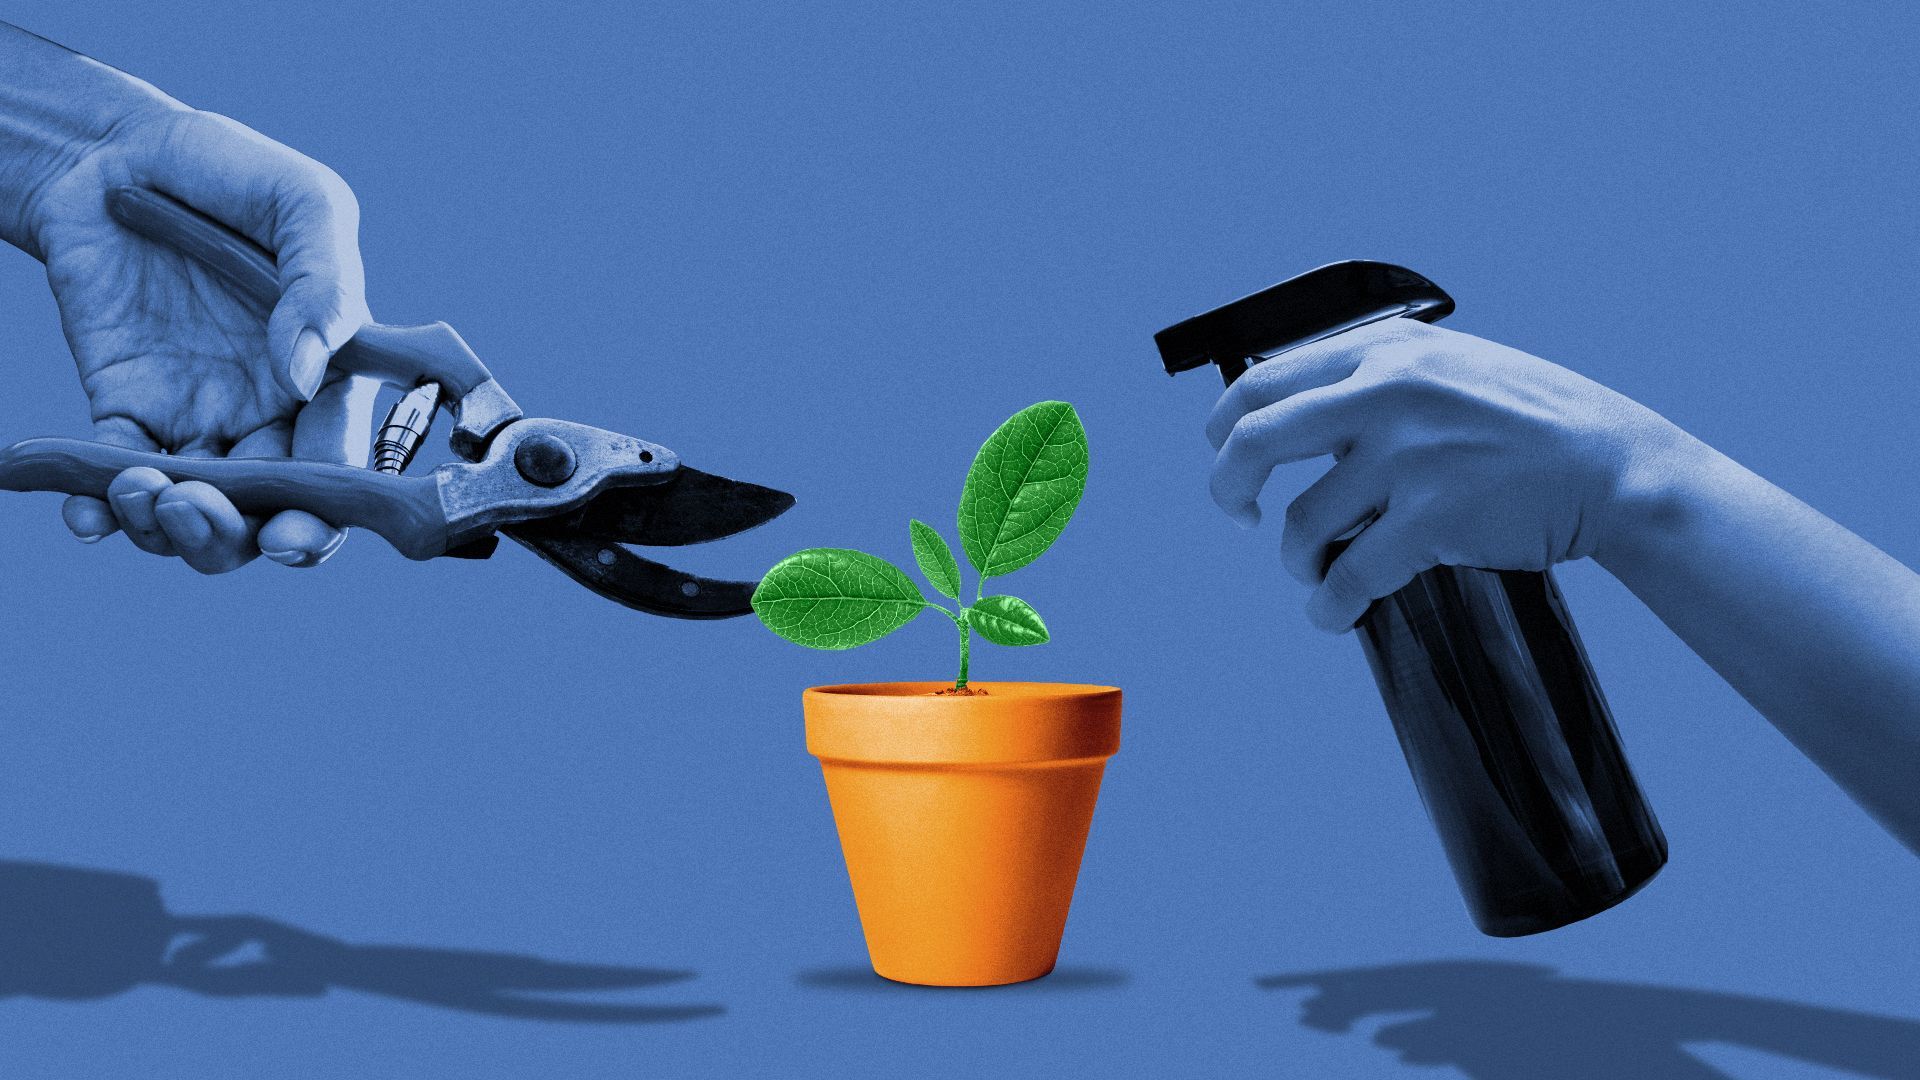 Illustration of hands holding garden scissors and a spray bottle next to a small potted plant.